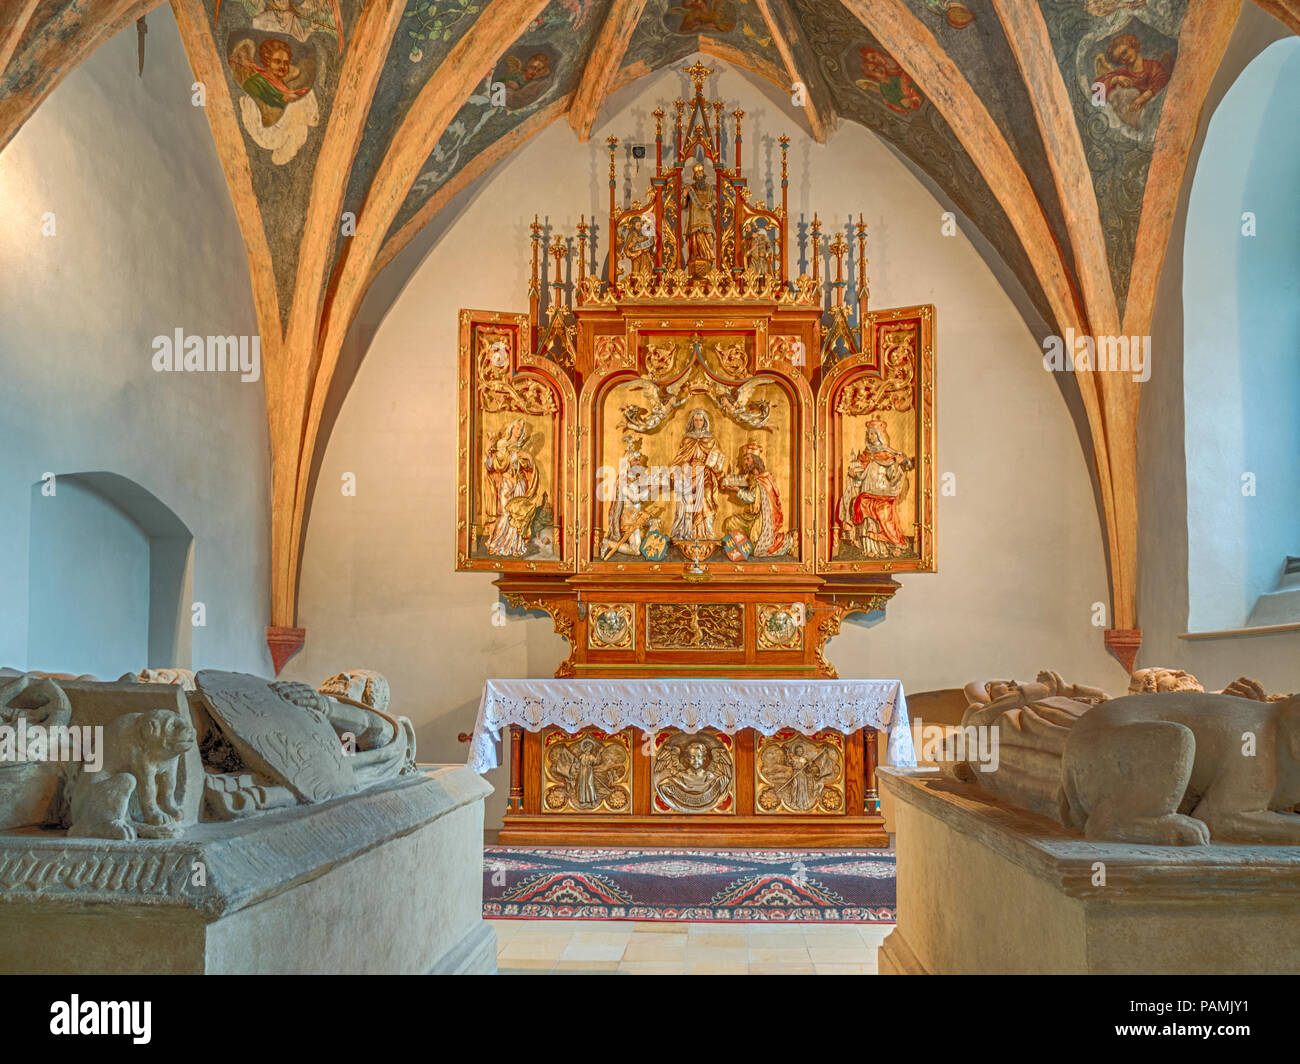 Interior of the Franciscan church of the Holy Trinity and the Assumption of the Blessed Virgin Mary in Opole, Poland Stock Photo